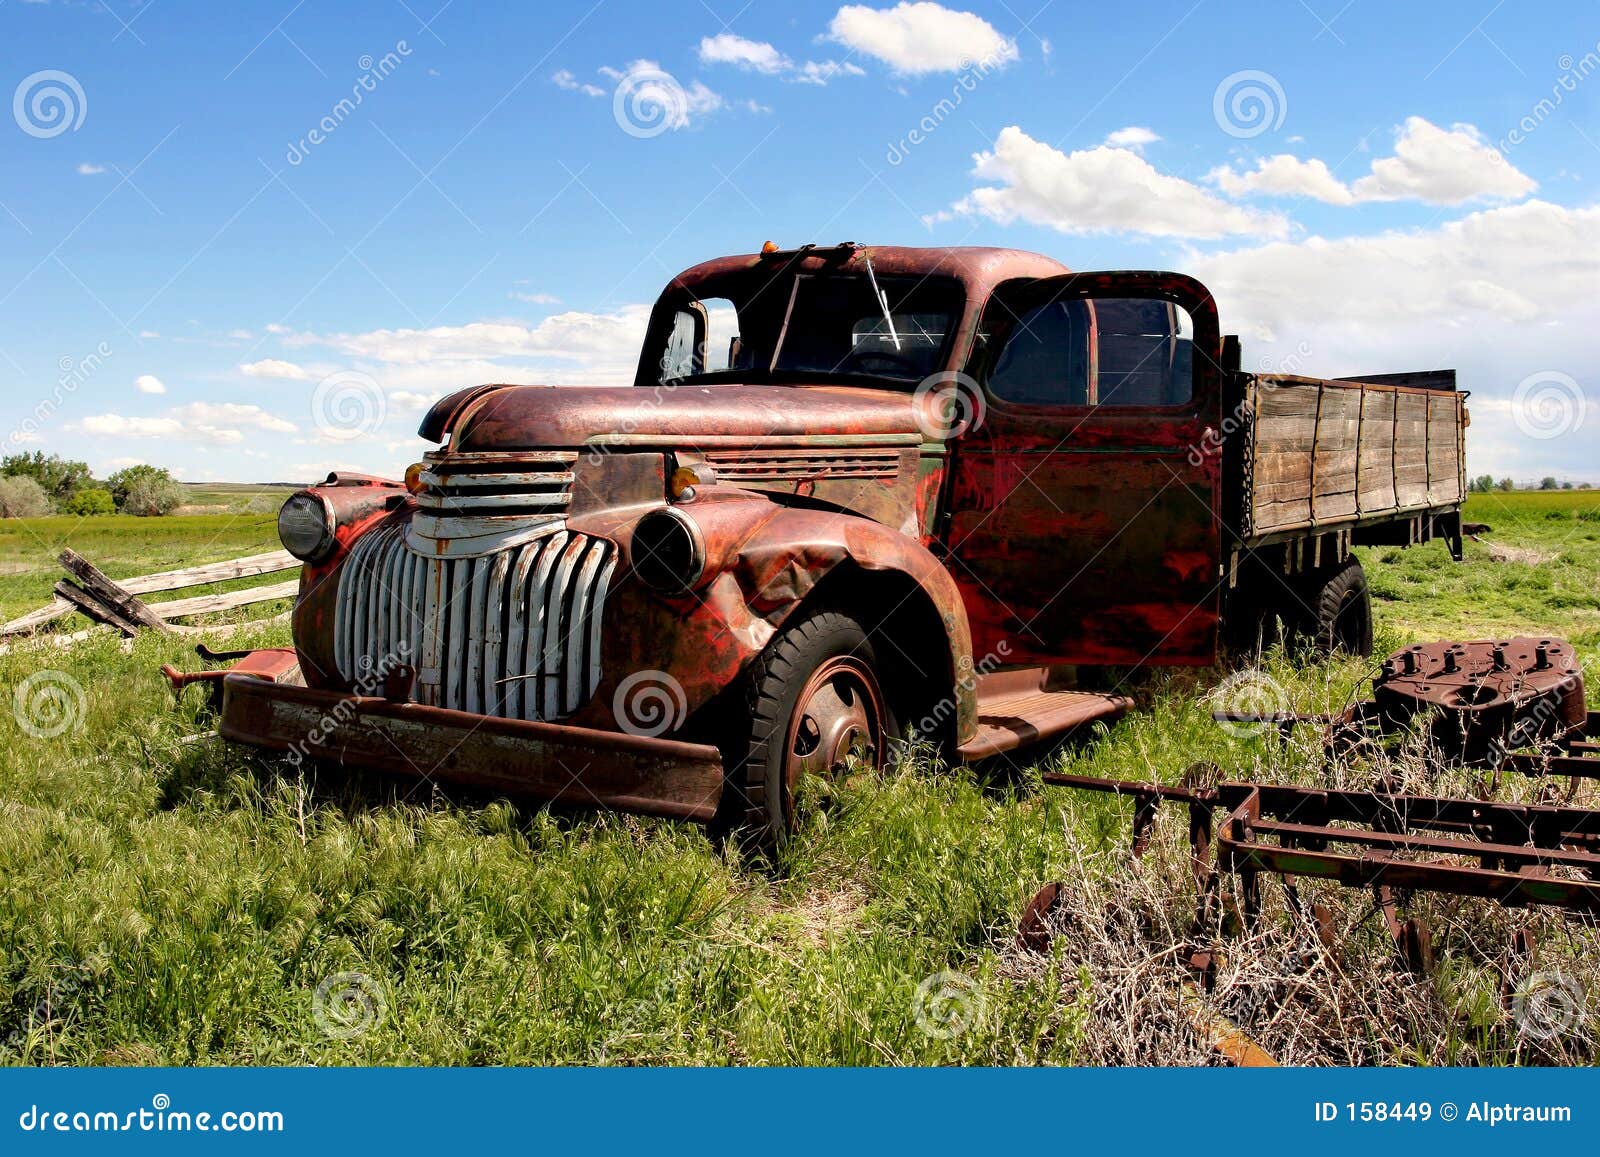 Vintage Farm Truck Royalty Free Stock Images  Image: 158449